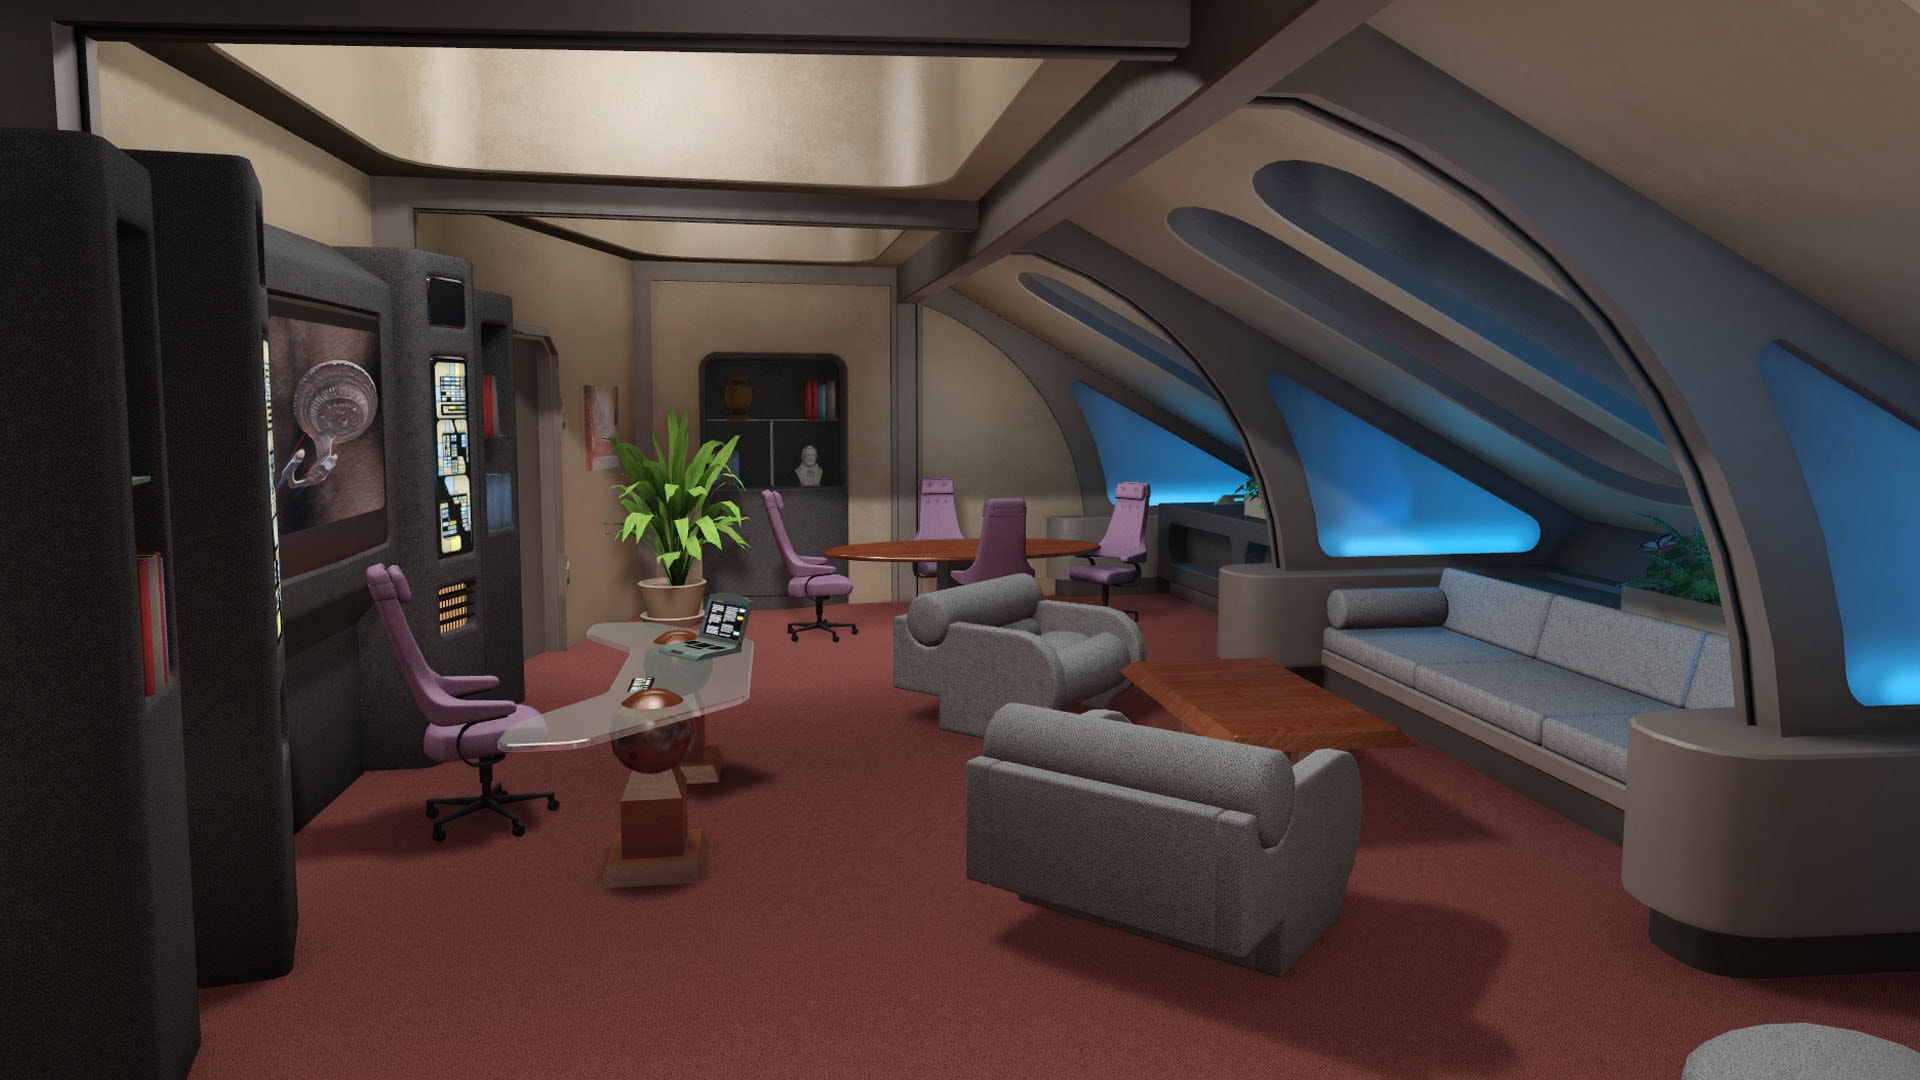 Discovery Uniforms Tng Shuttle And The Galaxy Interior